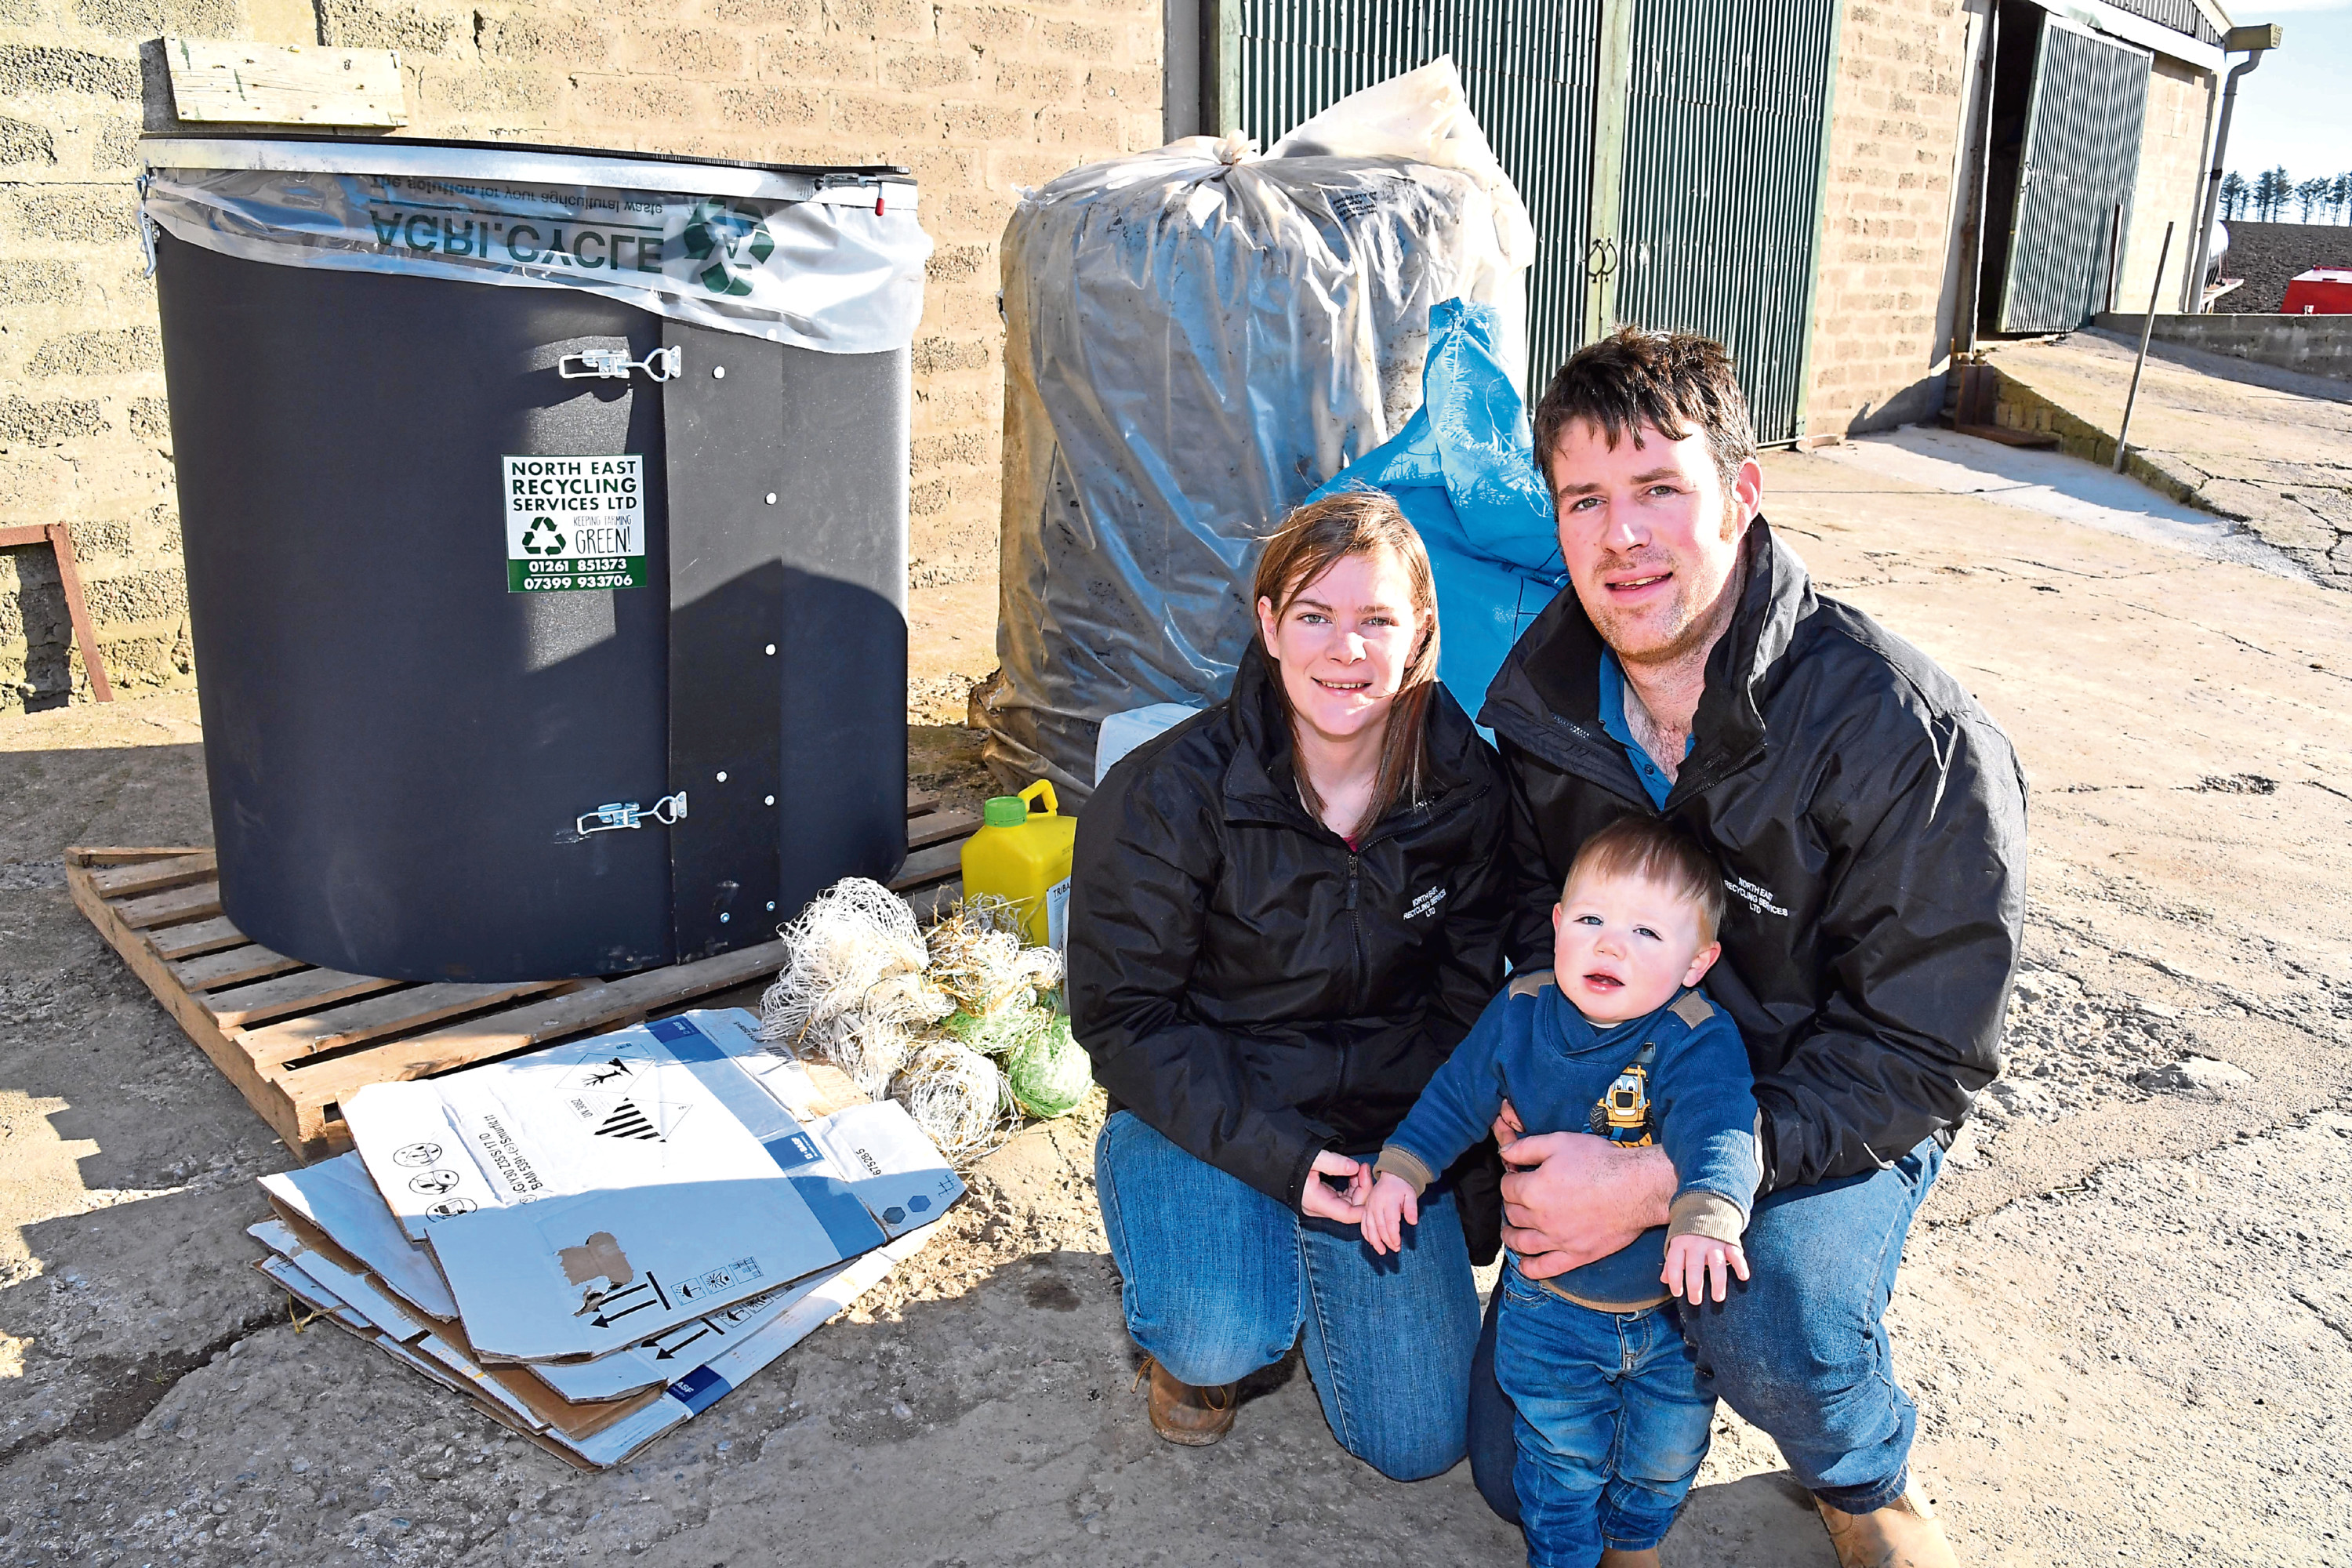 Graham and Ashleigh Thompson, and son Charlie, with the recycling bin they are marketing and some of the items which are collected and baled.